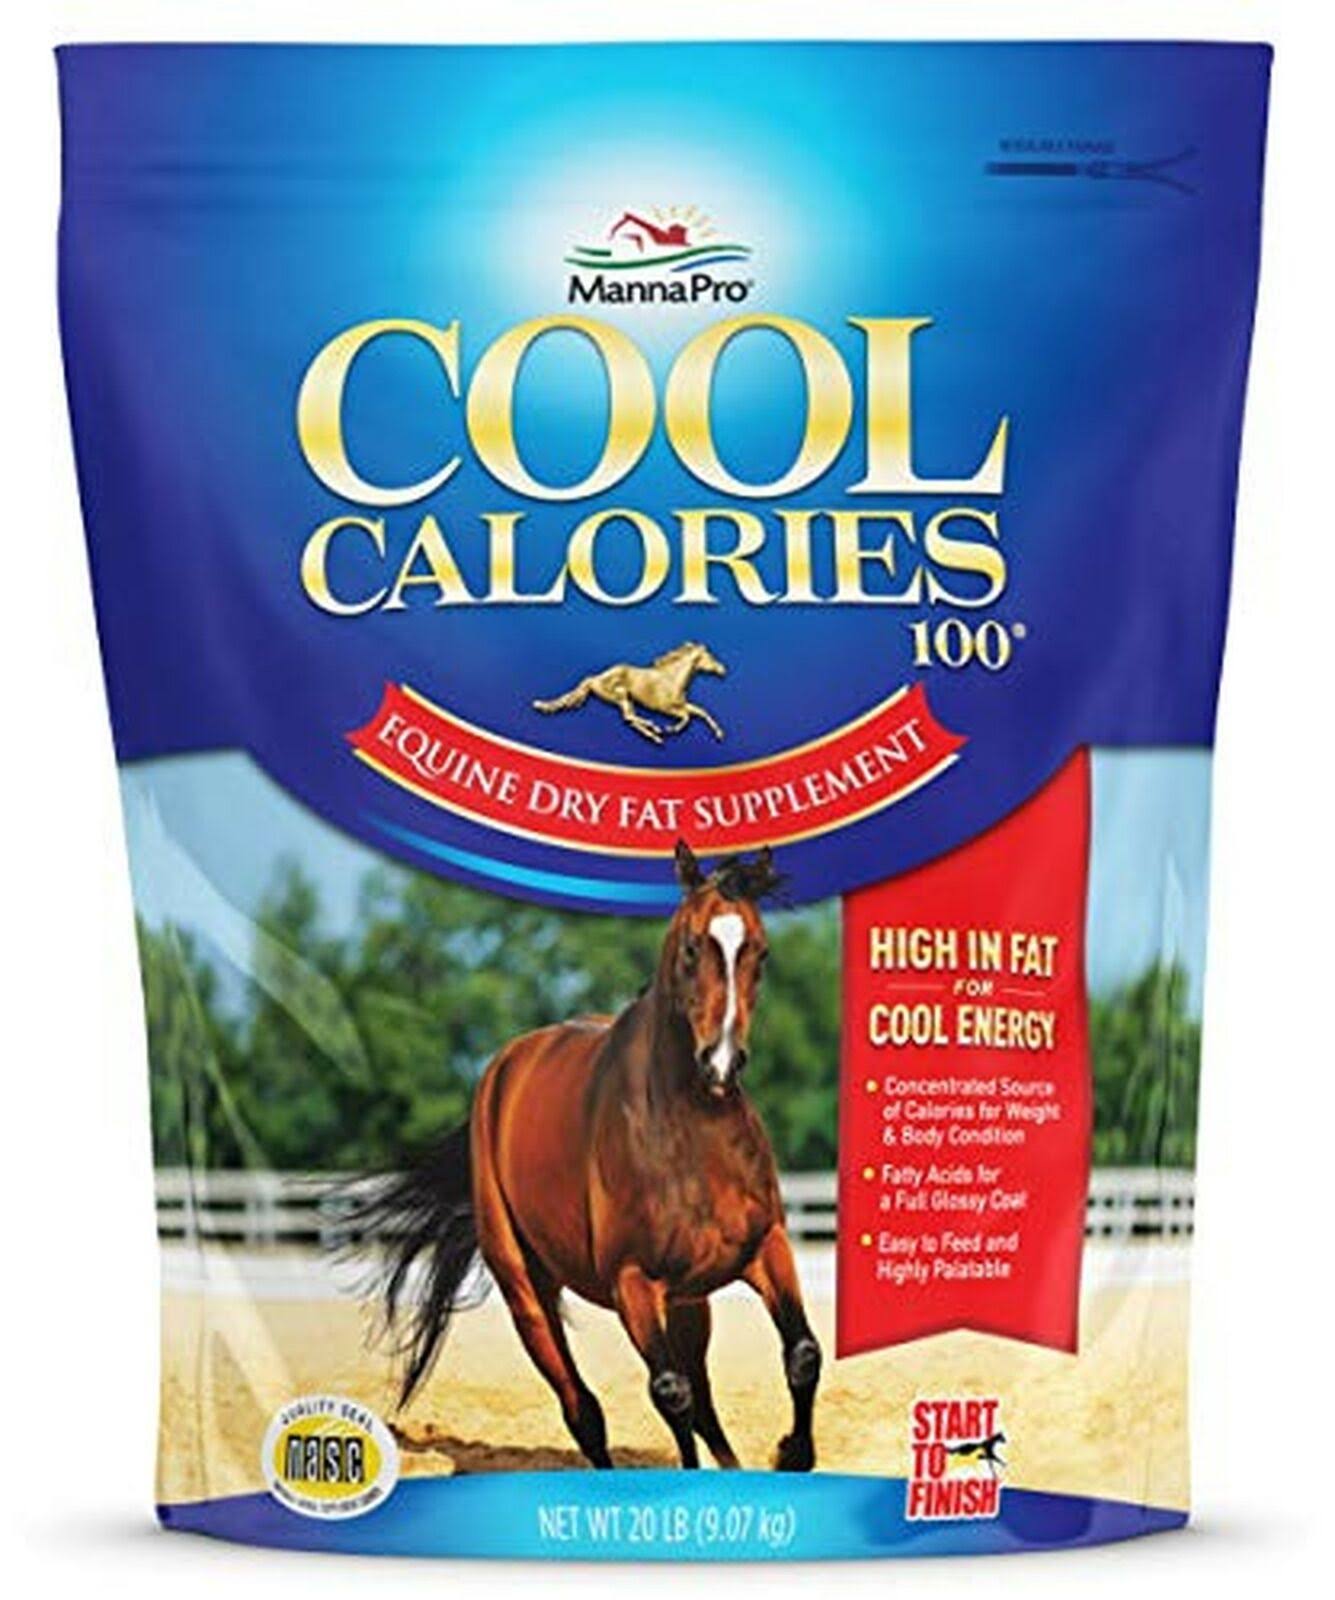 Start to Finish Cool Calories 100 Horse Supplement - 20lbs